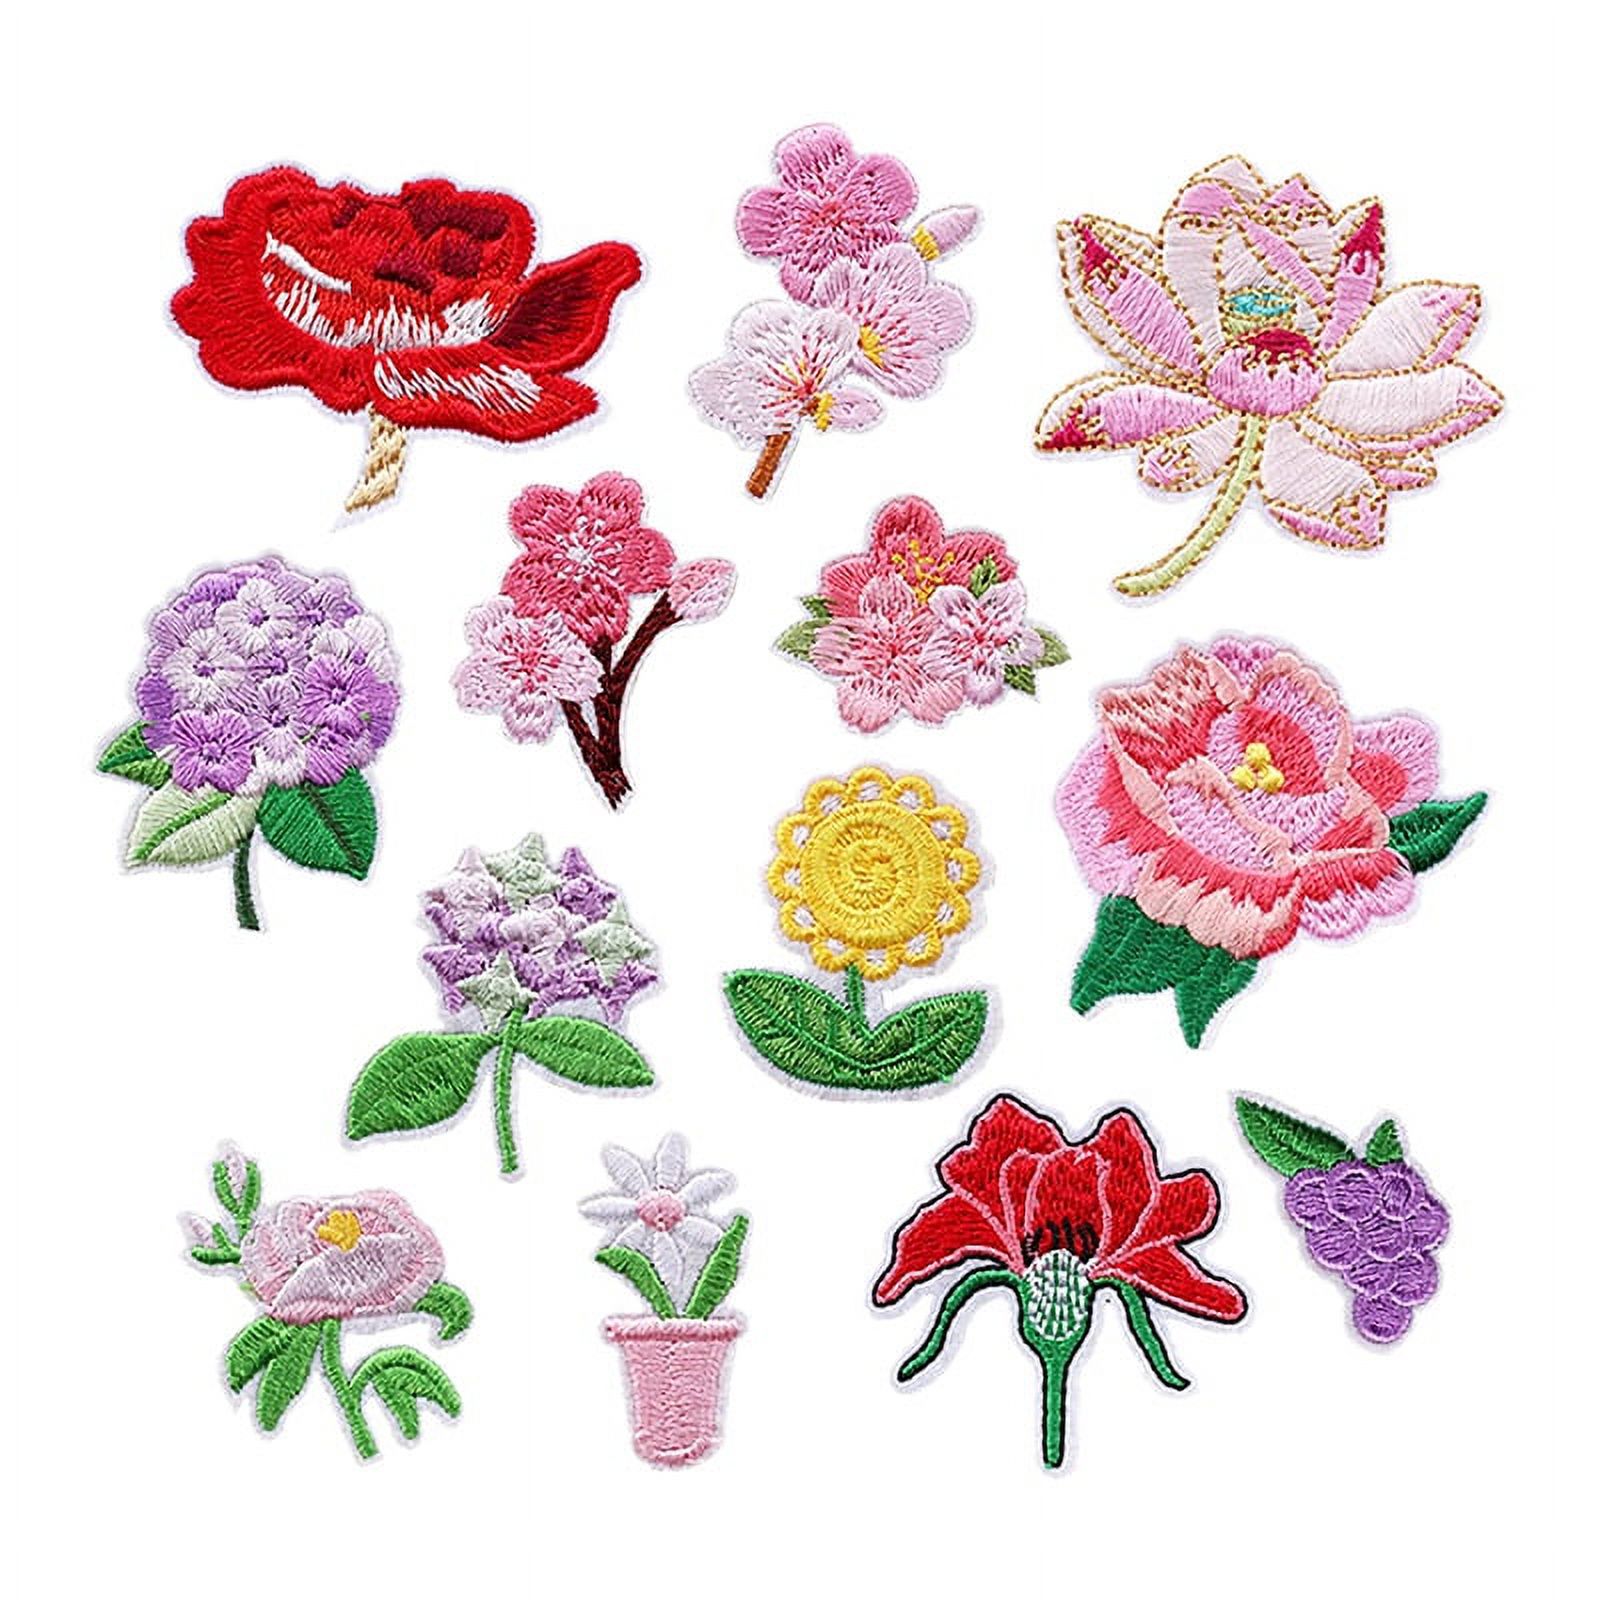 13 Pcs Iron on Patches Flower Appliques Stickers, Embroidery Decorative Patches Applique Sew on Patches, Size: Small, As Shown